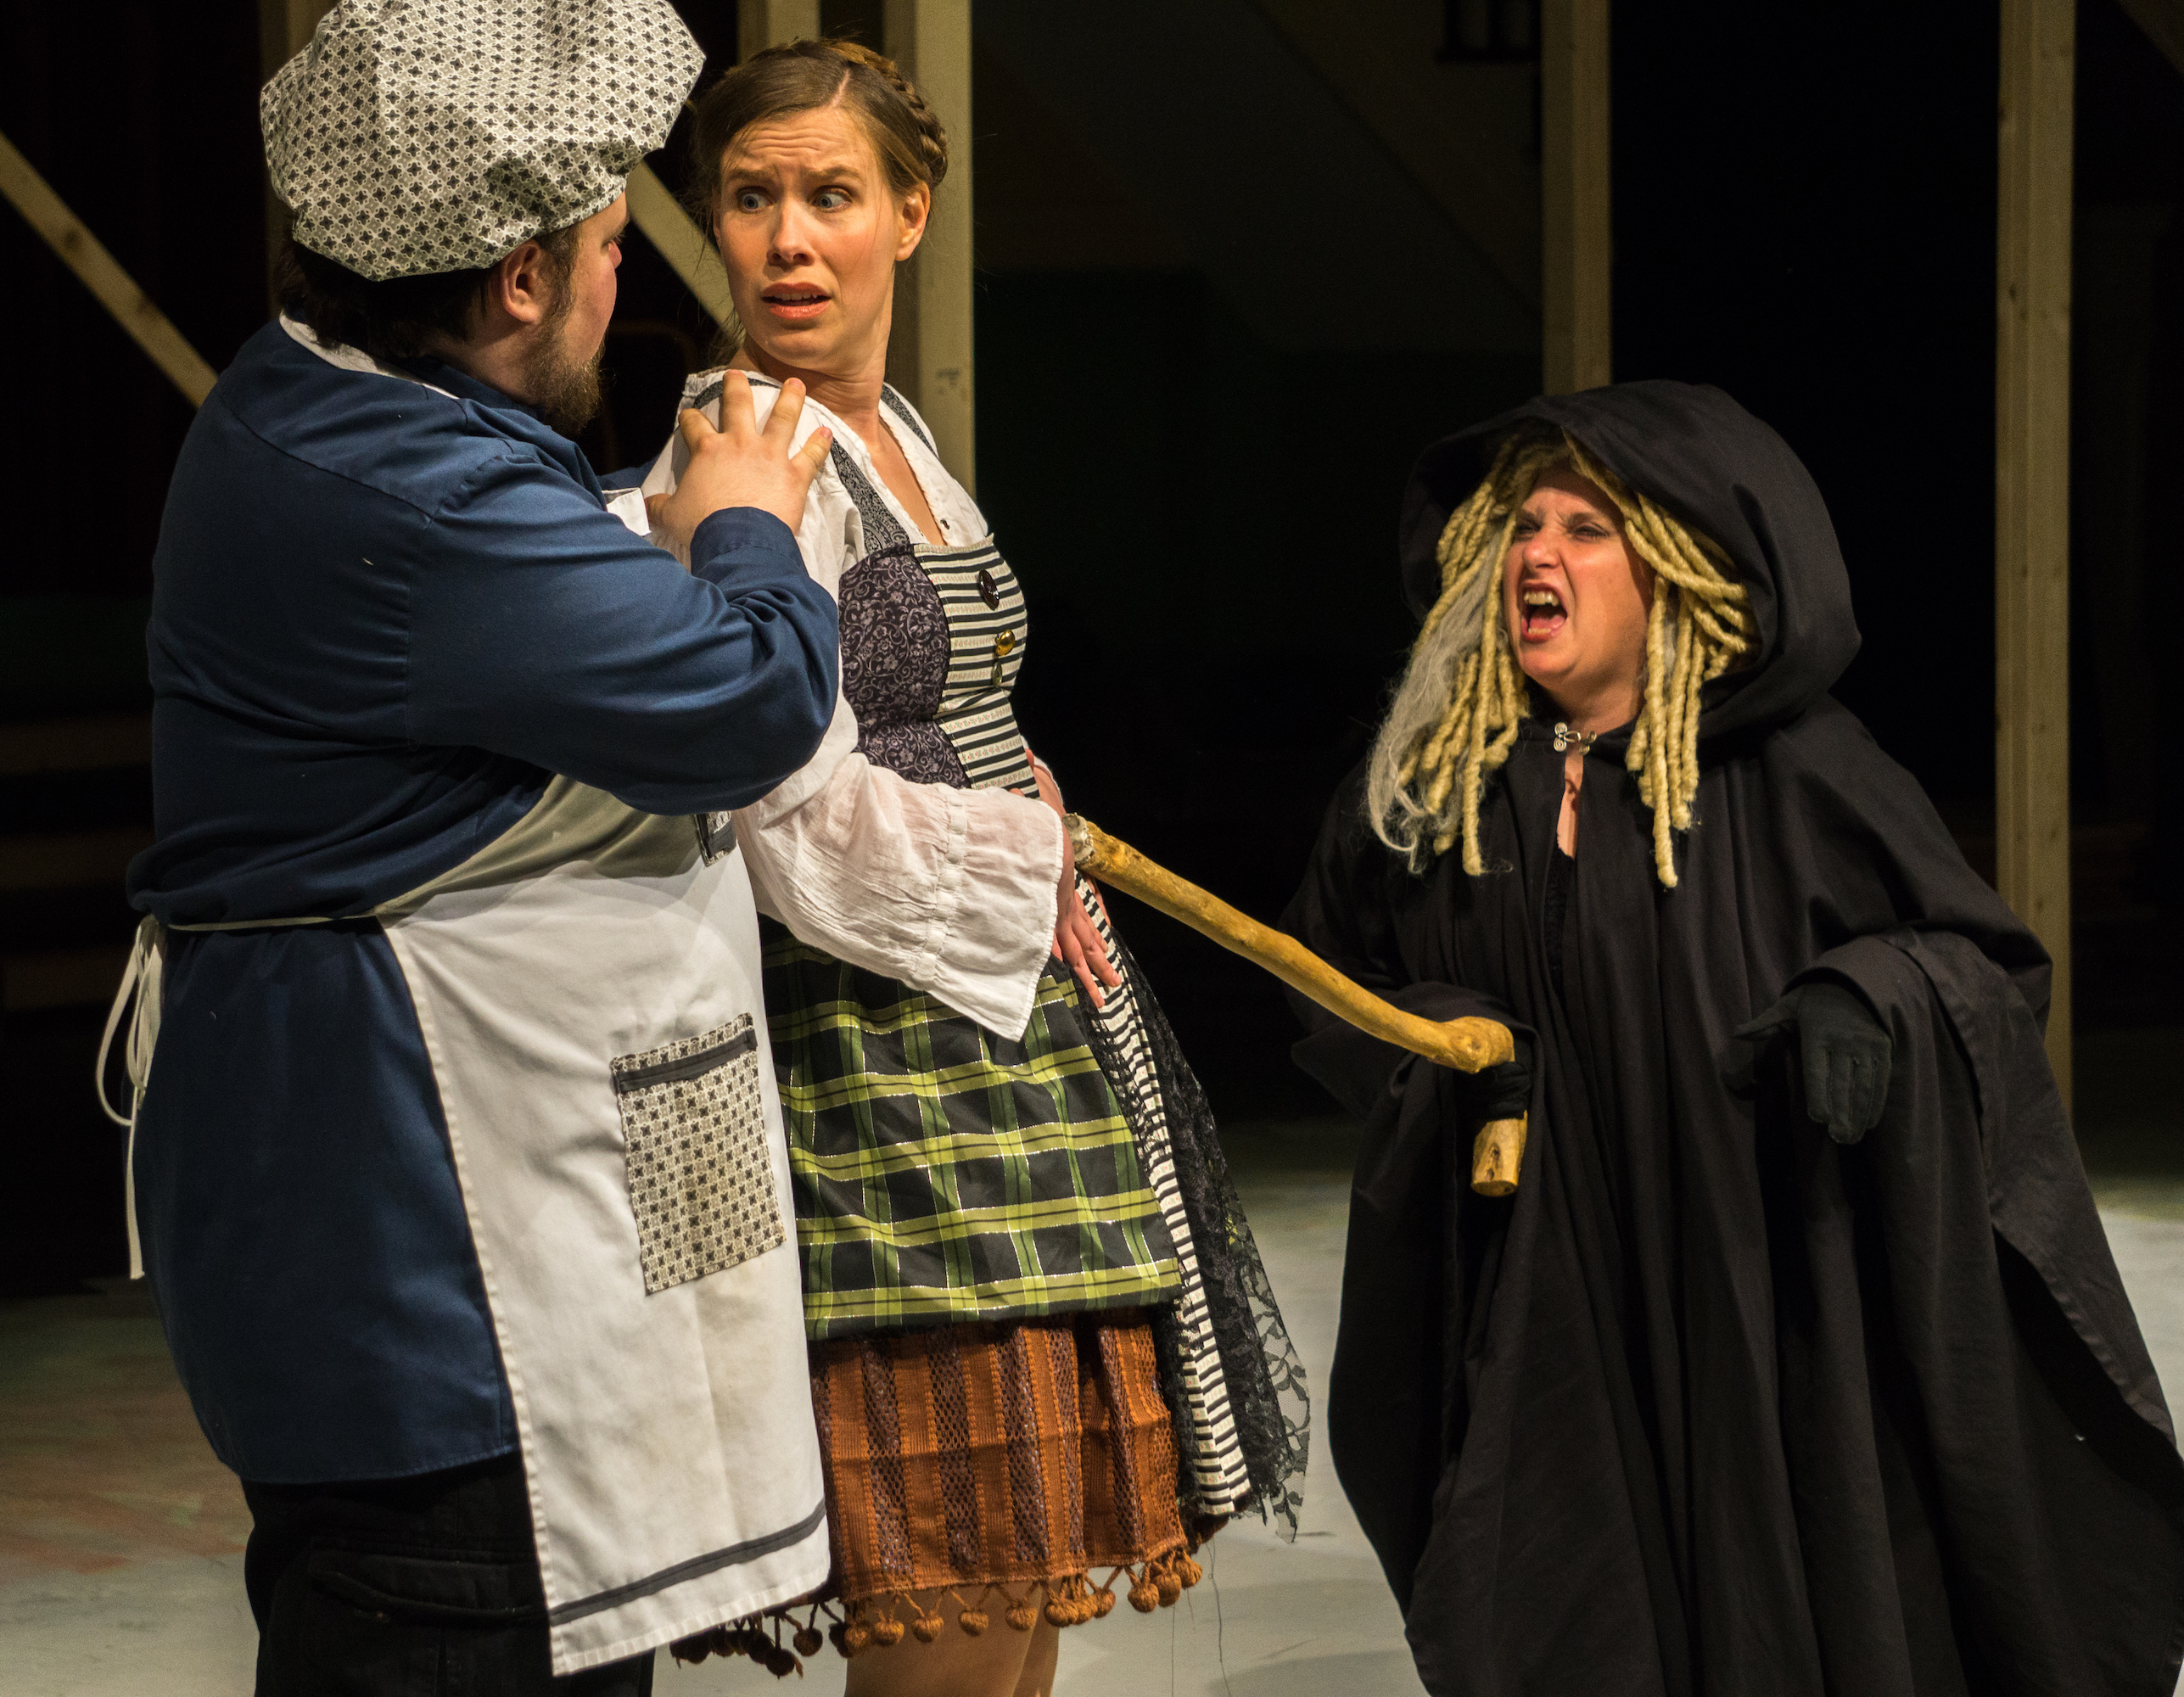 The Witch (cloaked in black) threatens The Bakers Wife (Carolyn Wesley in multi-colored, short skirted peasant outfit) by lunging at her with her magic cane, while the Baker (Nick Wheeler, in polka dotted baking cap & matching apron) tries to protect his wife